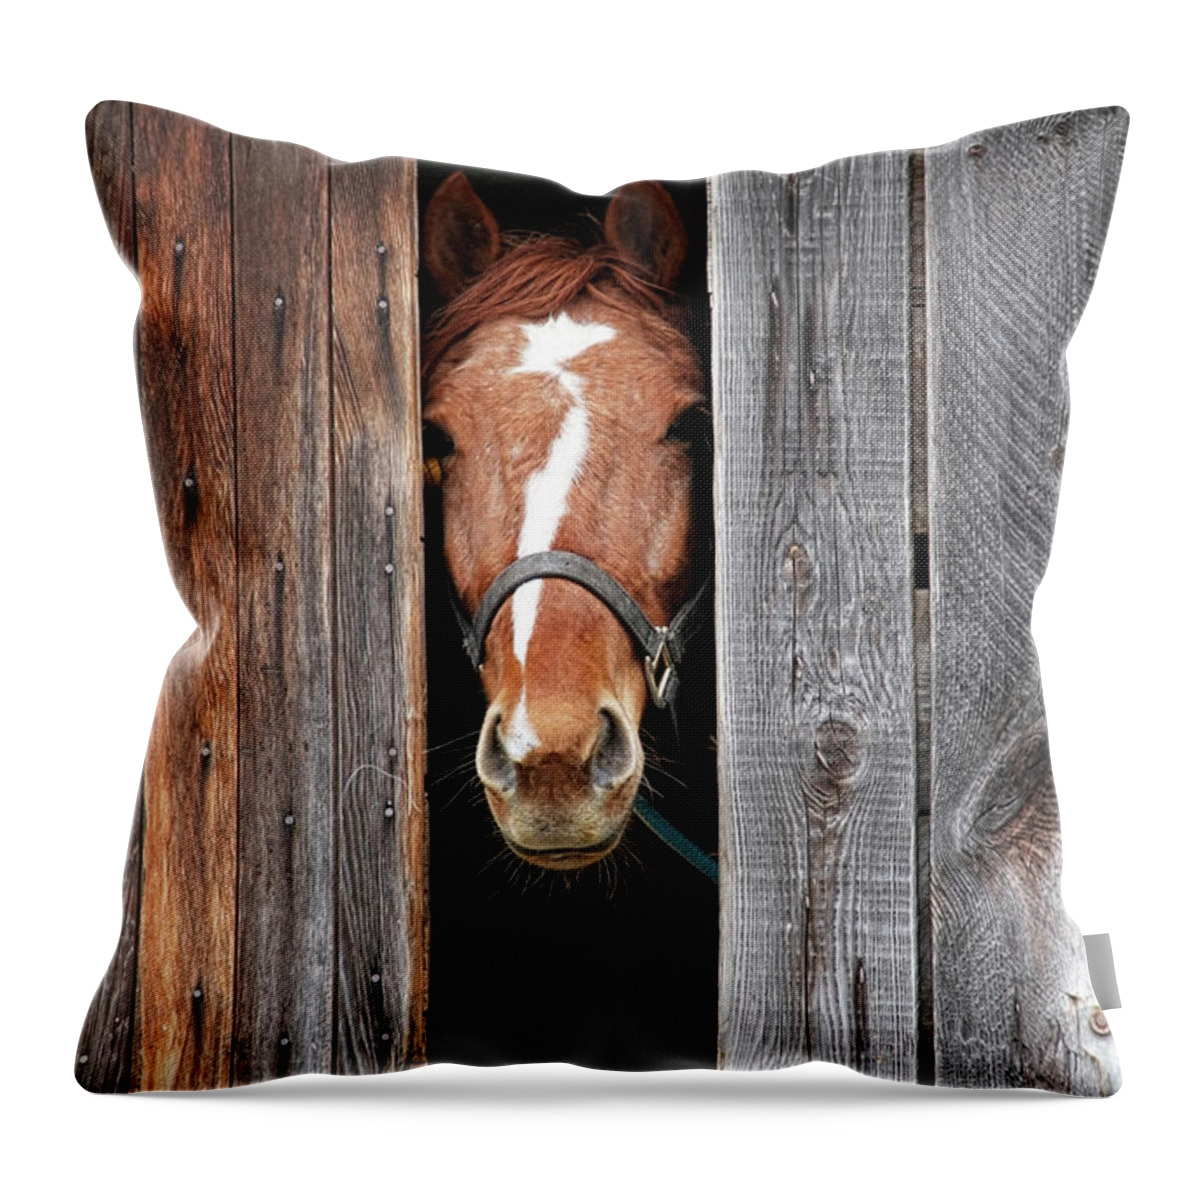 Horse Throw Pillow featuring the photograph Horse Peeking Out Of The Barn Door by 2ndlookgraphics